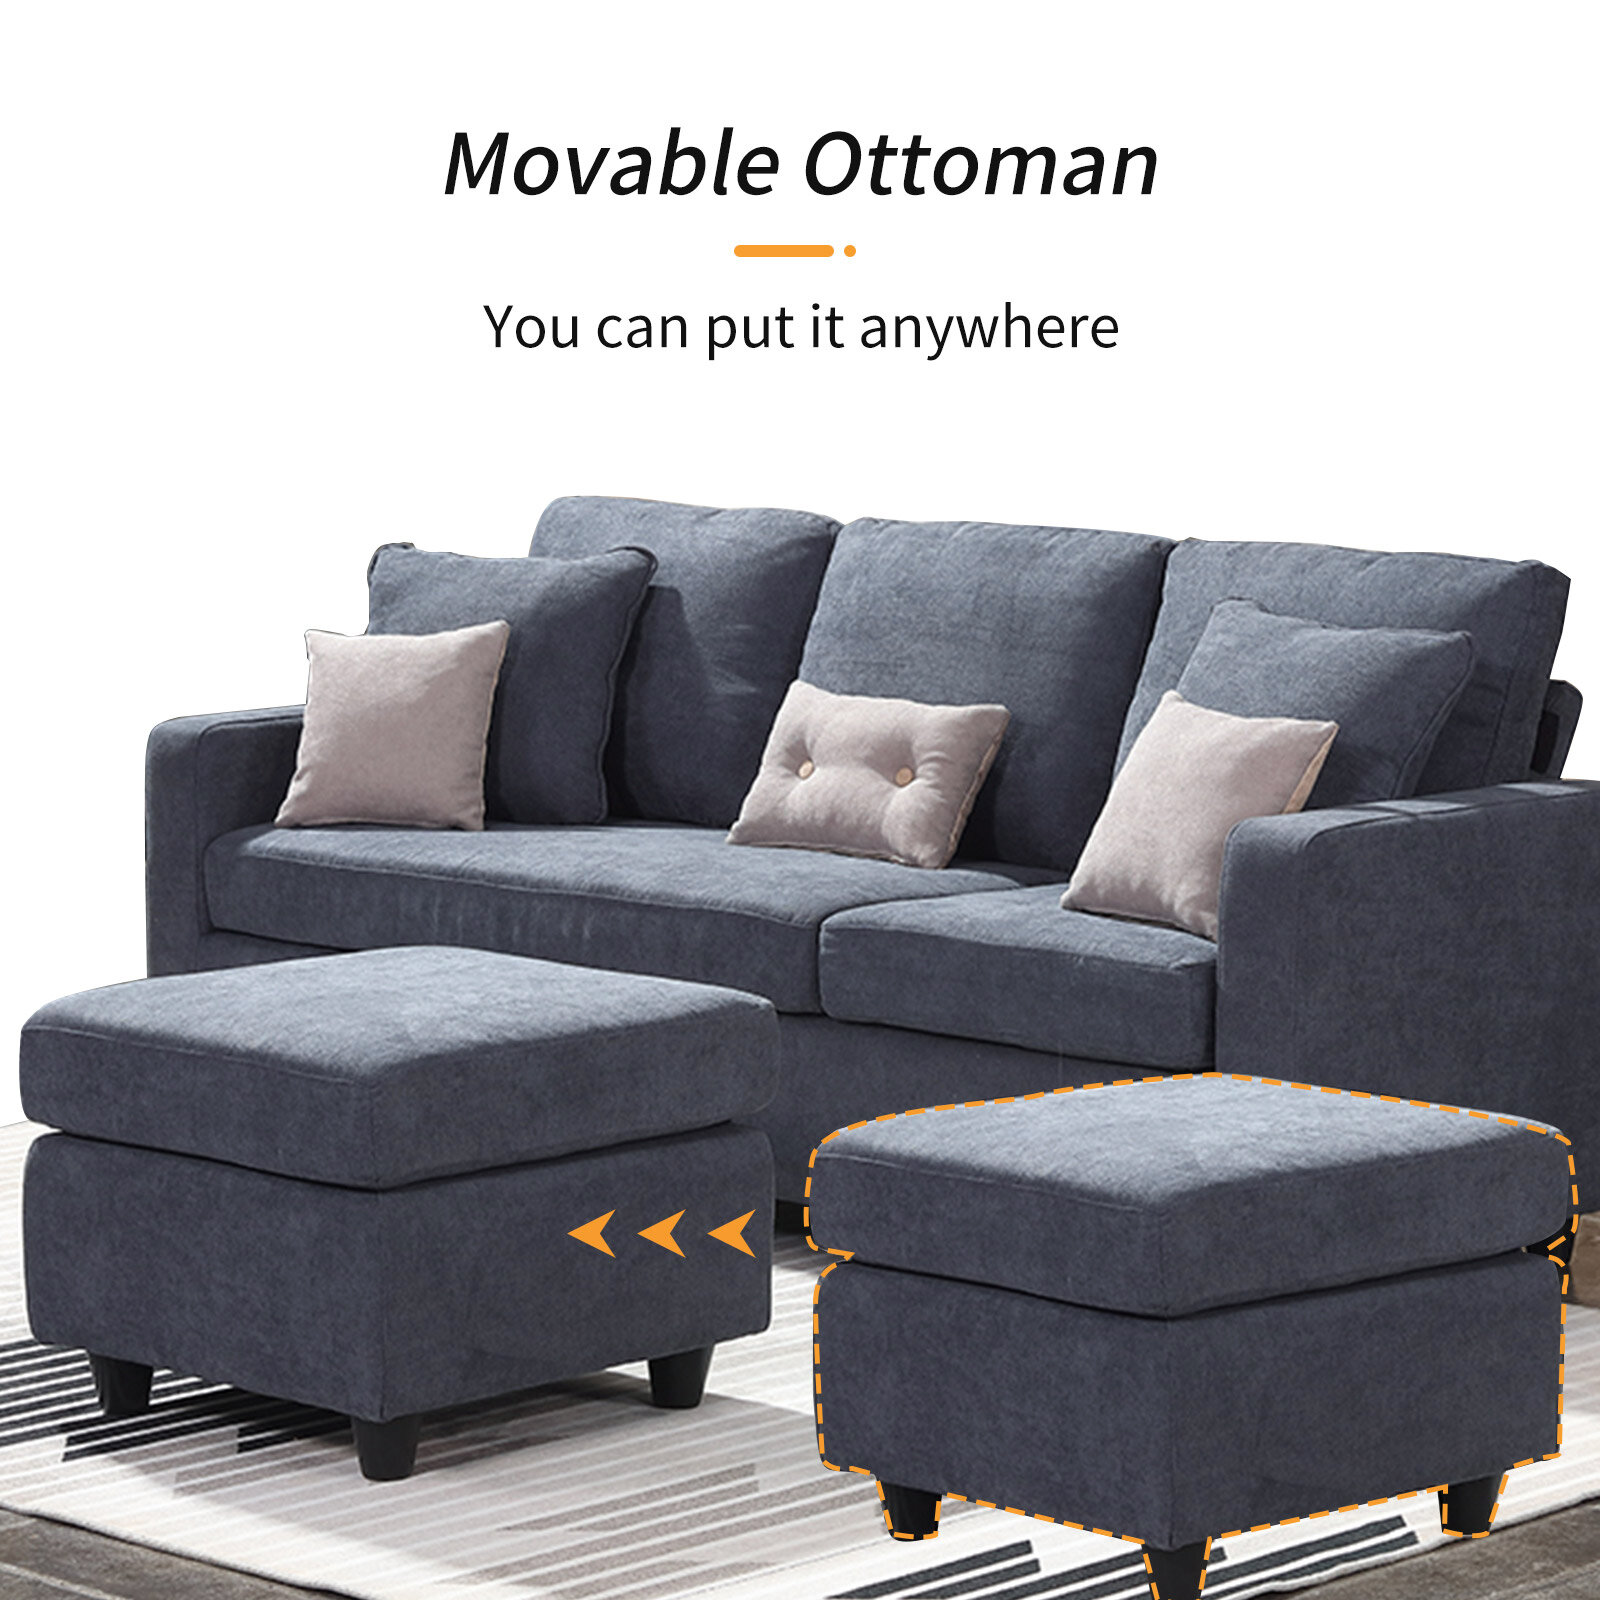 Customized Ottoman for Free Pattern